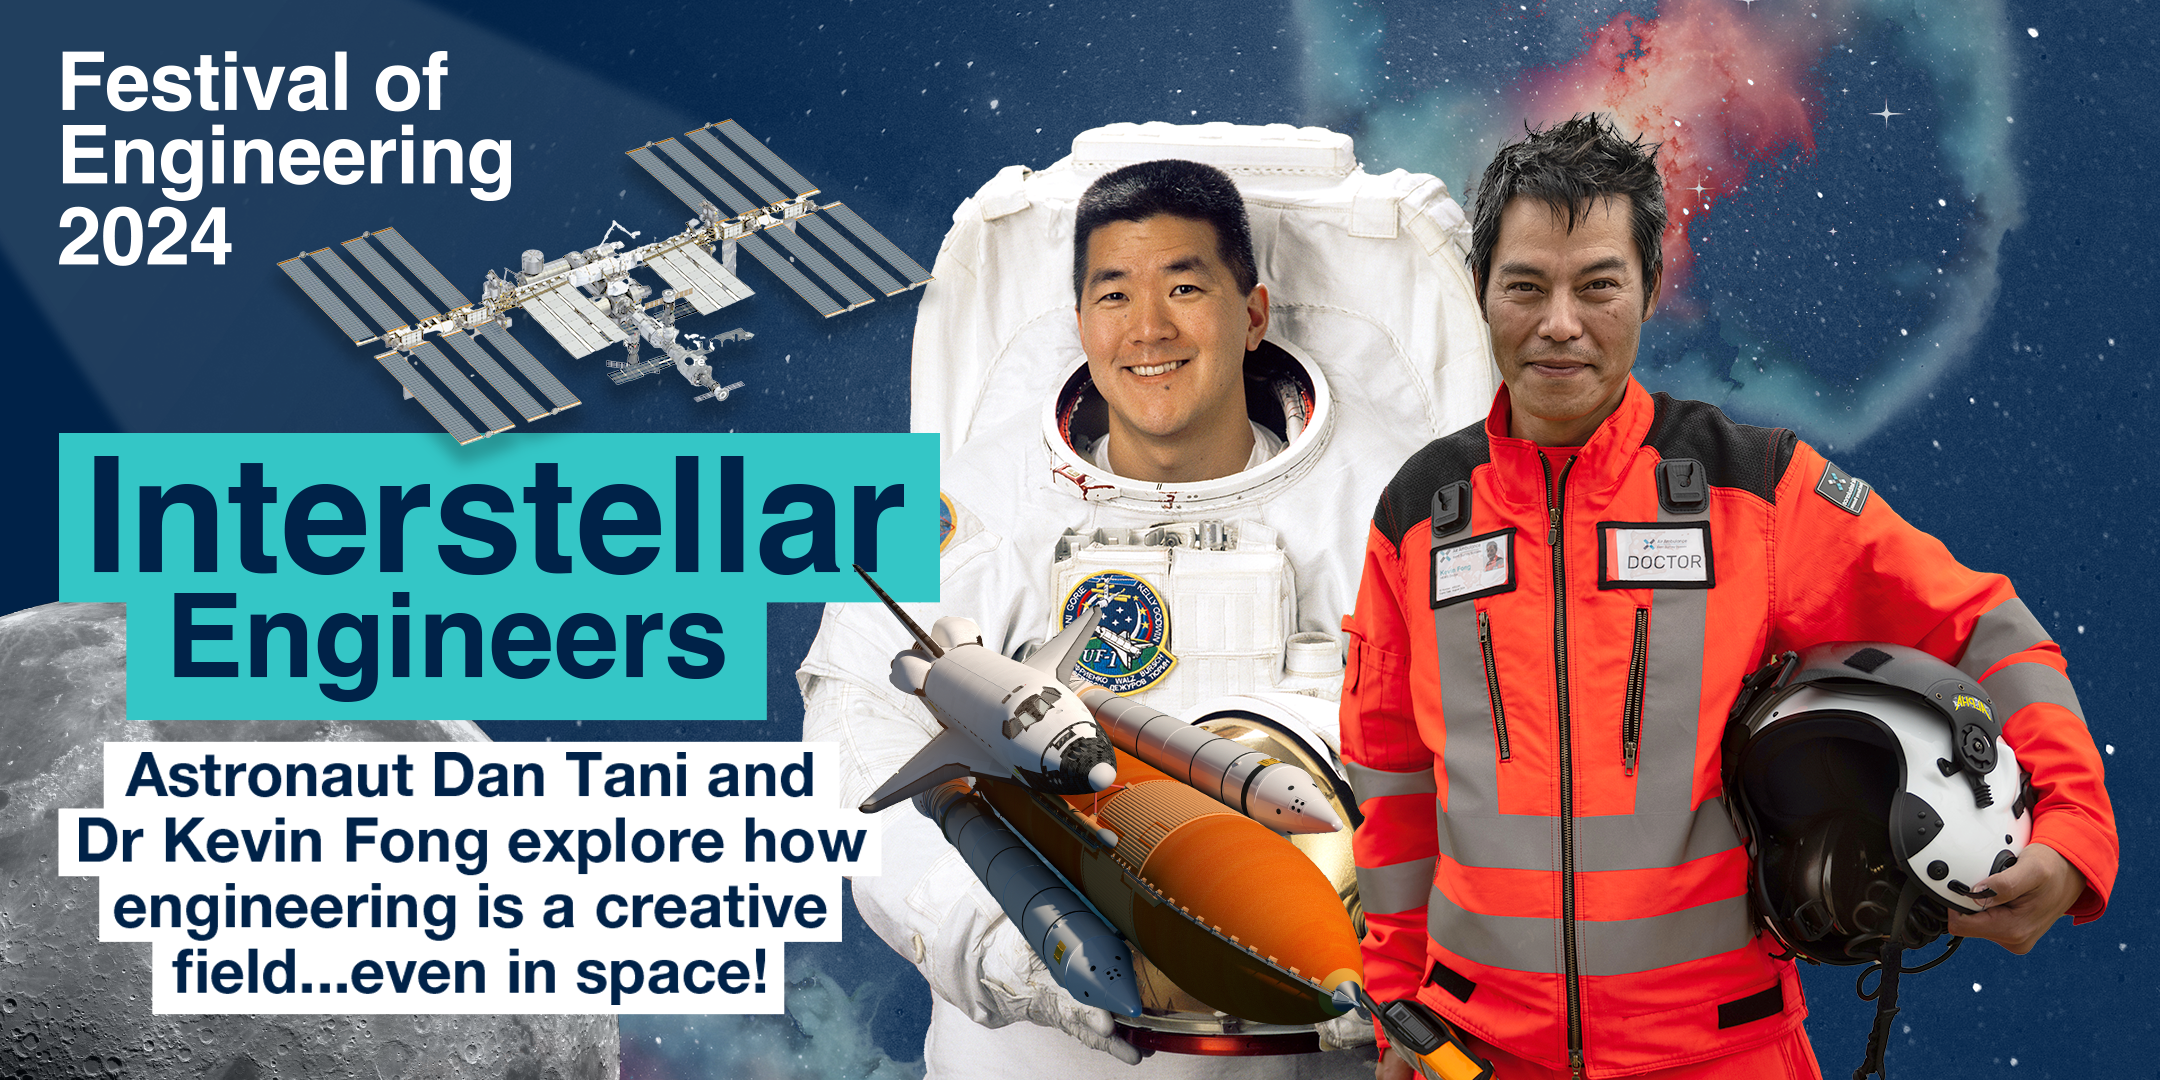 UCL Festival of Engineering, Interstellar Engineers, Dan Tani and Kevin Fong